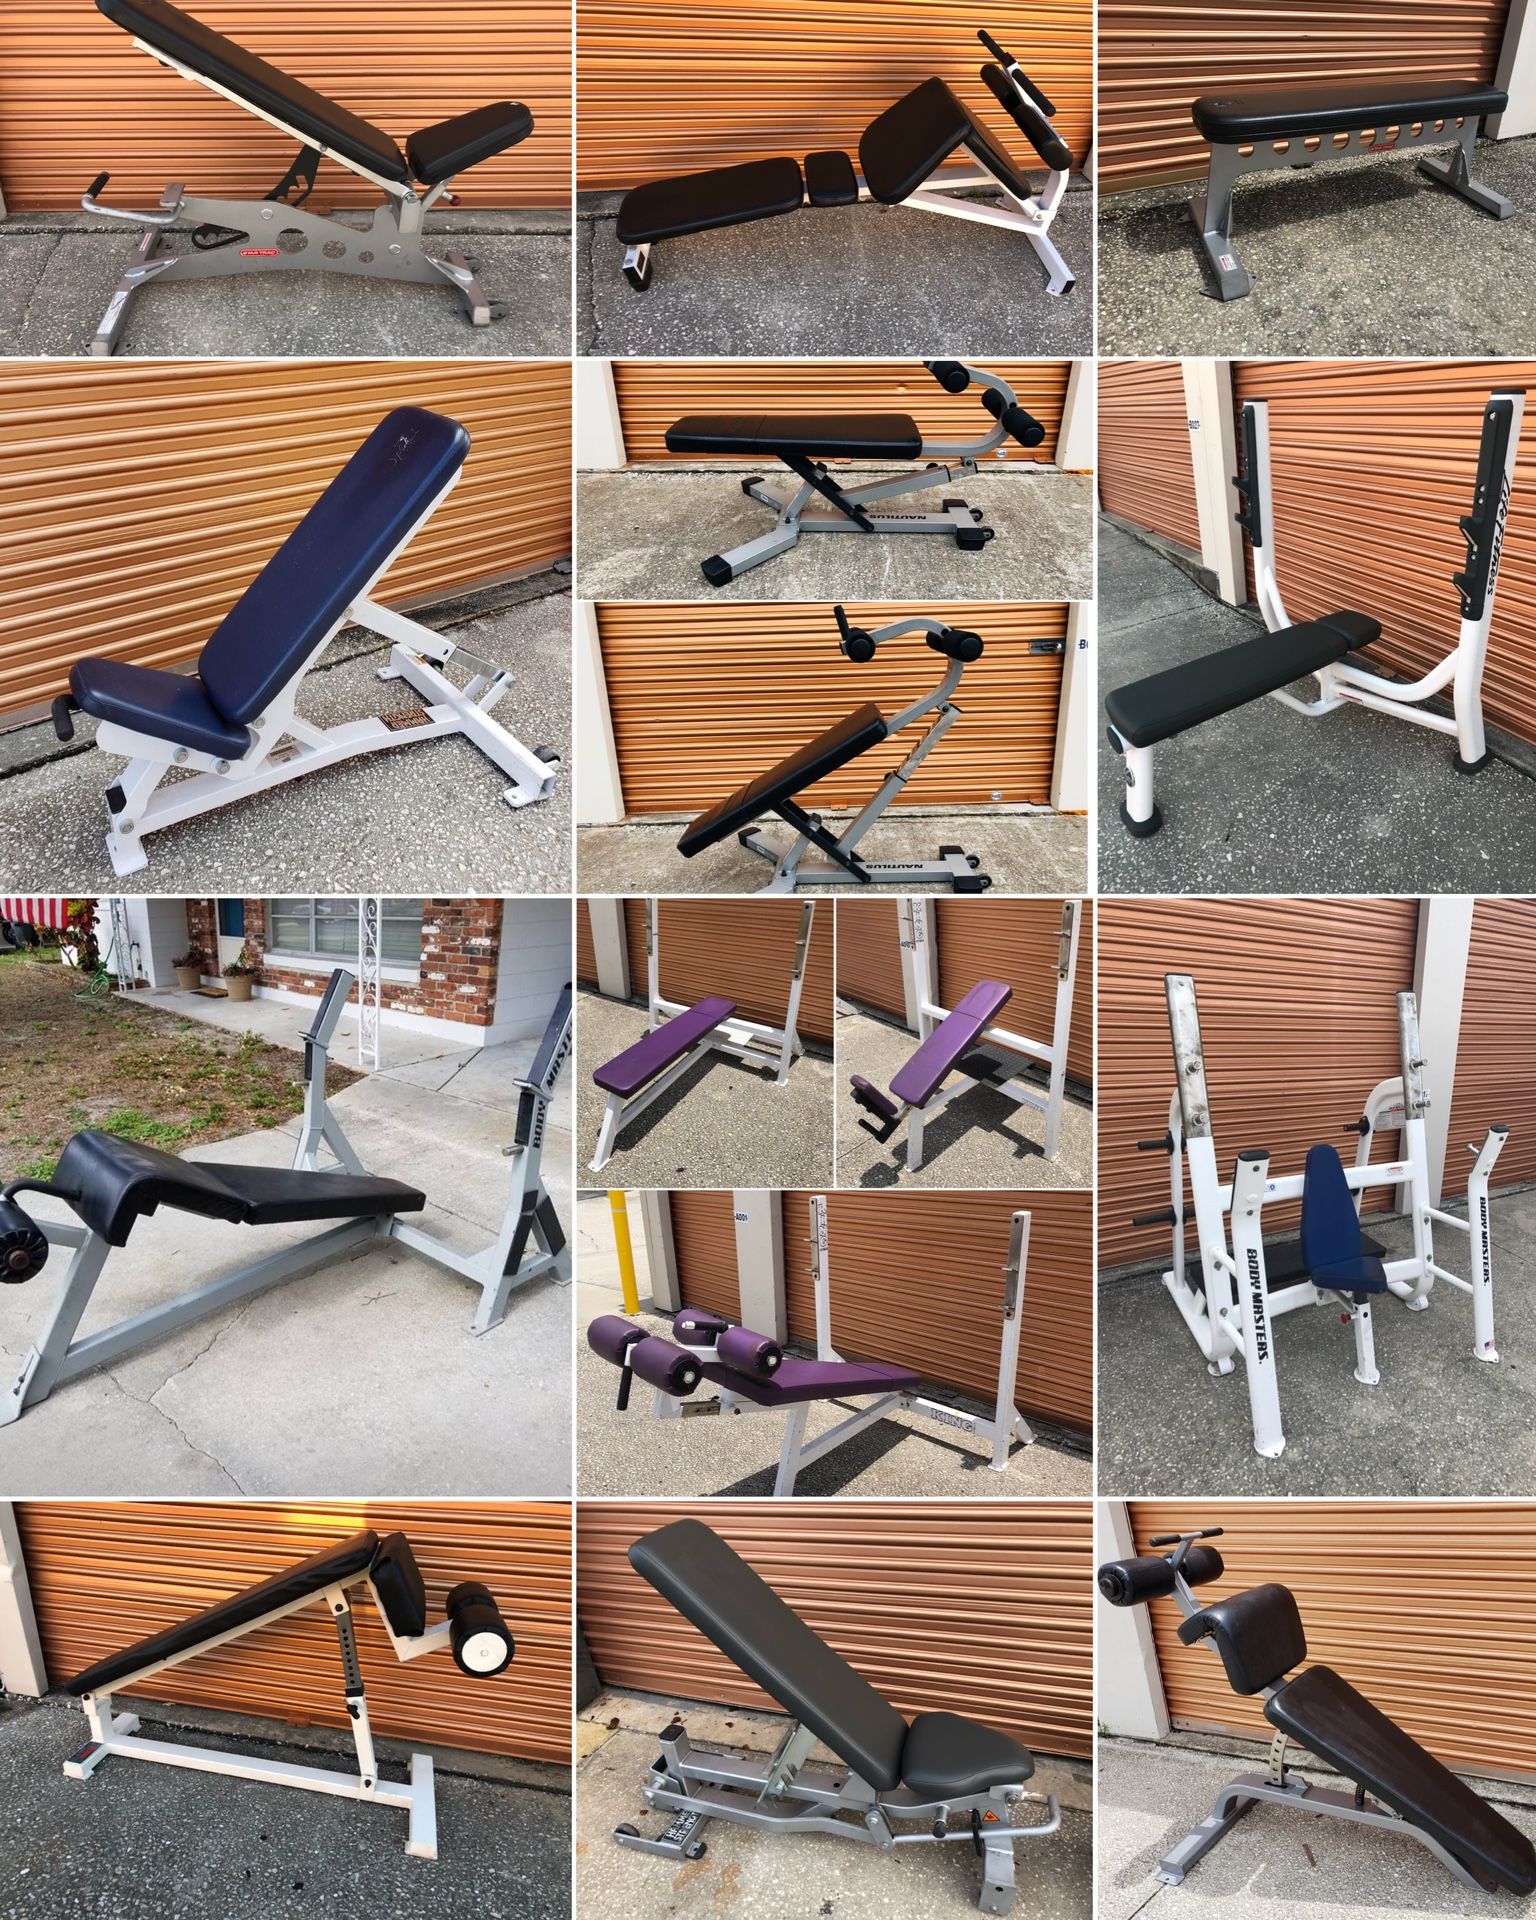 Flat, Incline, Decline, Shoulder Press, Adjustable, Ab/Abdominal Weight Benches Available